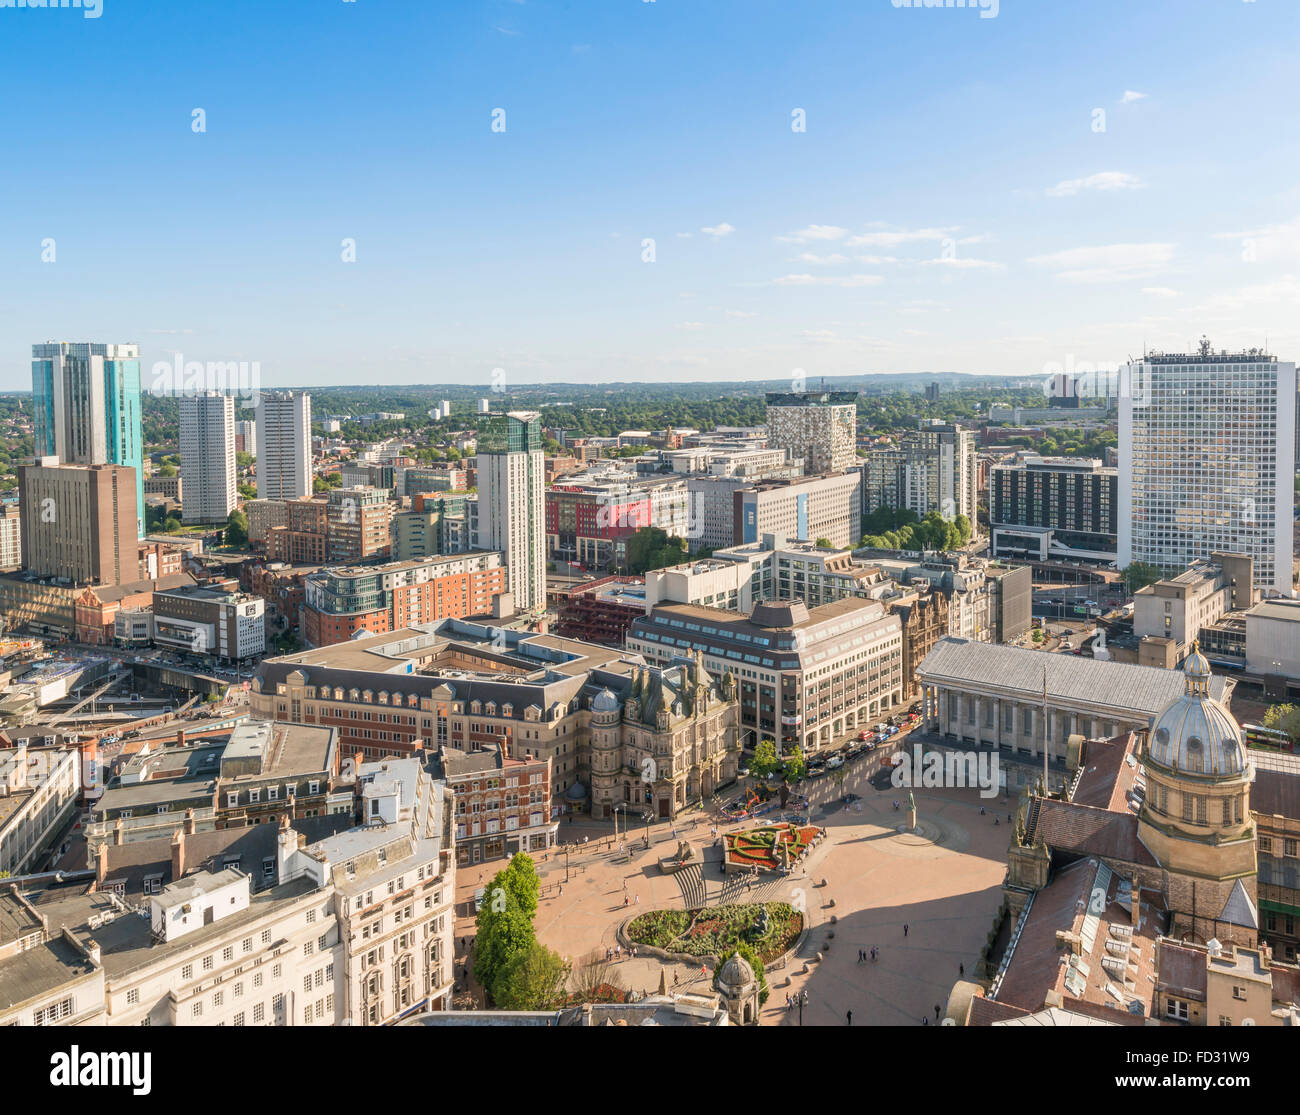 An aerial view of Birmingham City Centre. Stock Photo